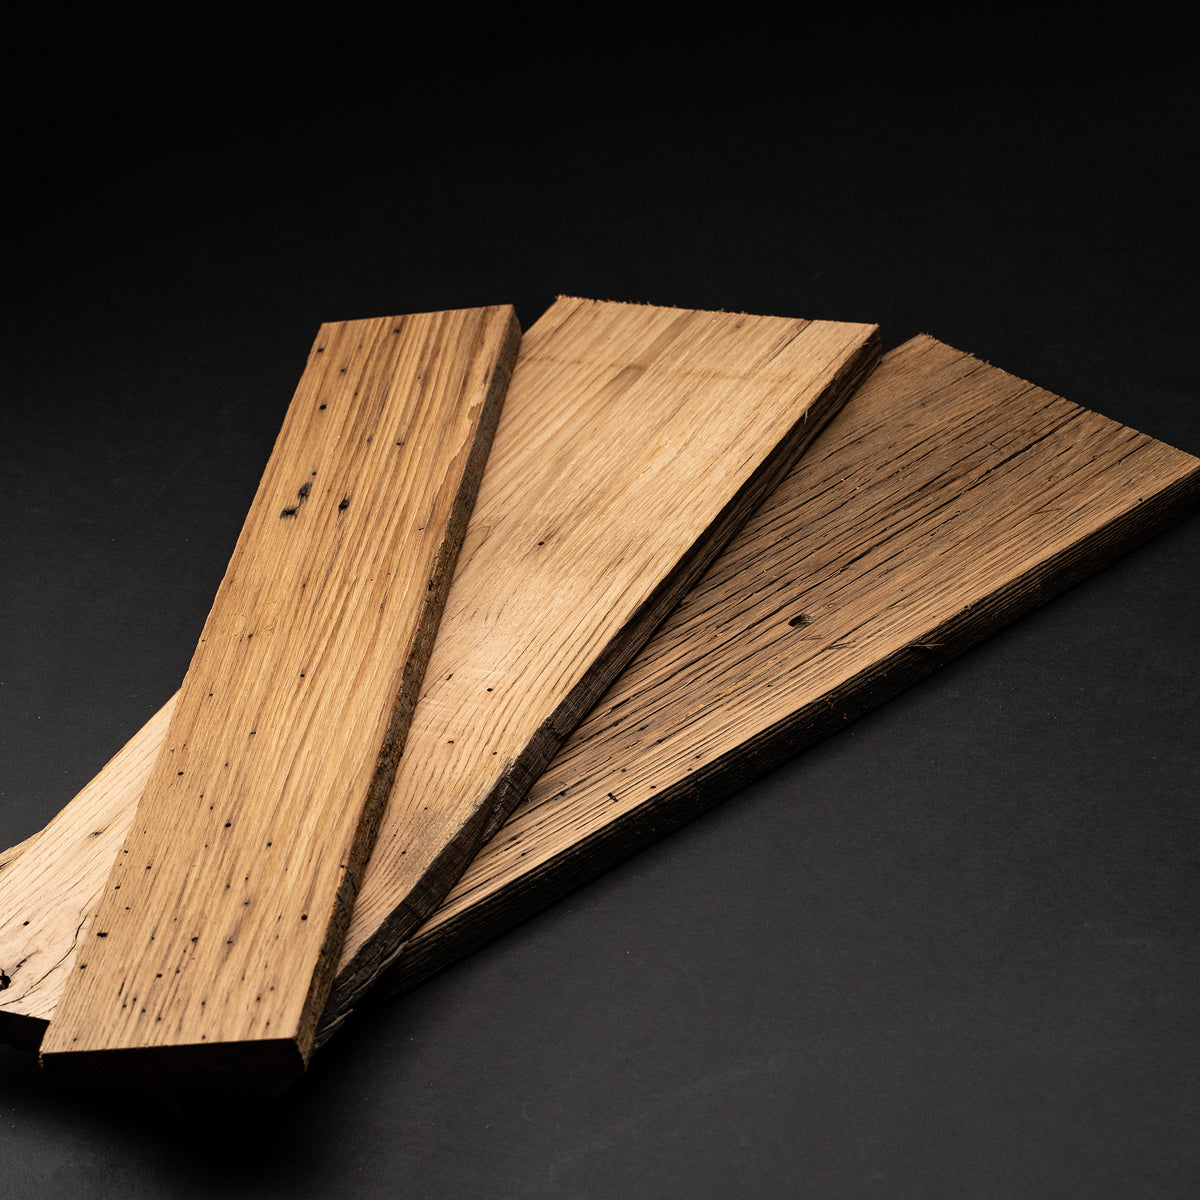 4/4 1” American Wormy Chestnut Wood Boards / Dimensional Lumber - Cut to Size Reclaim Reclaimed American Chestnut Board Wood